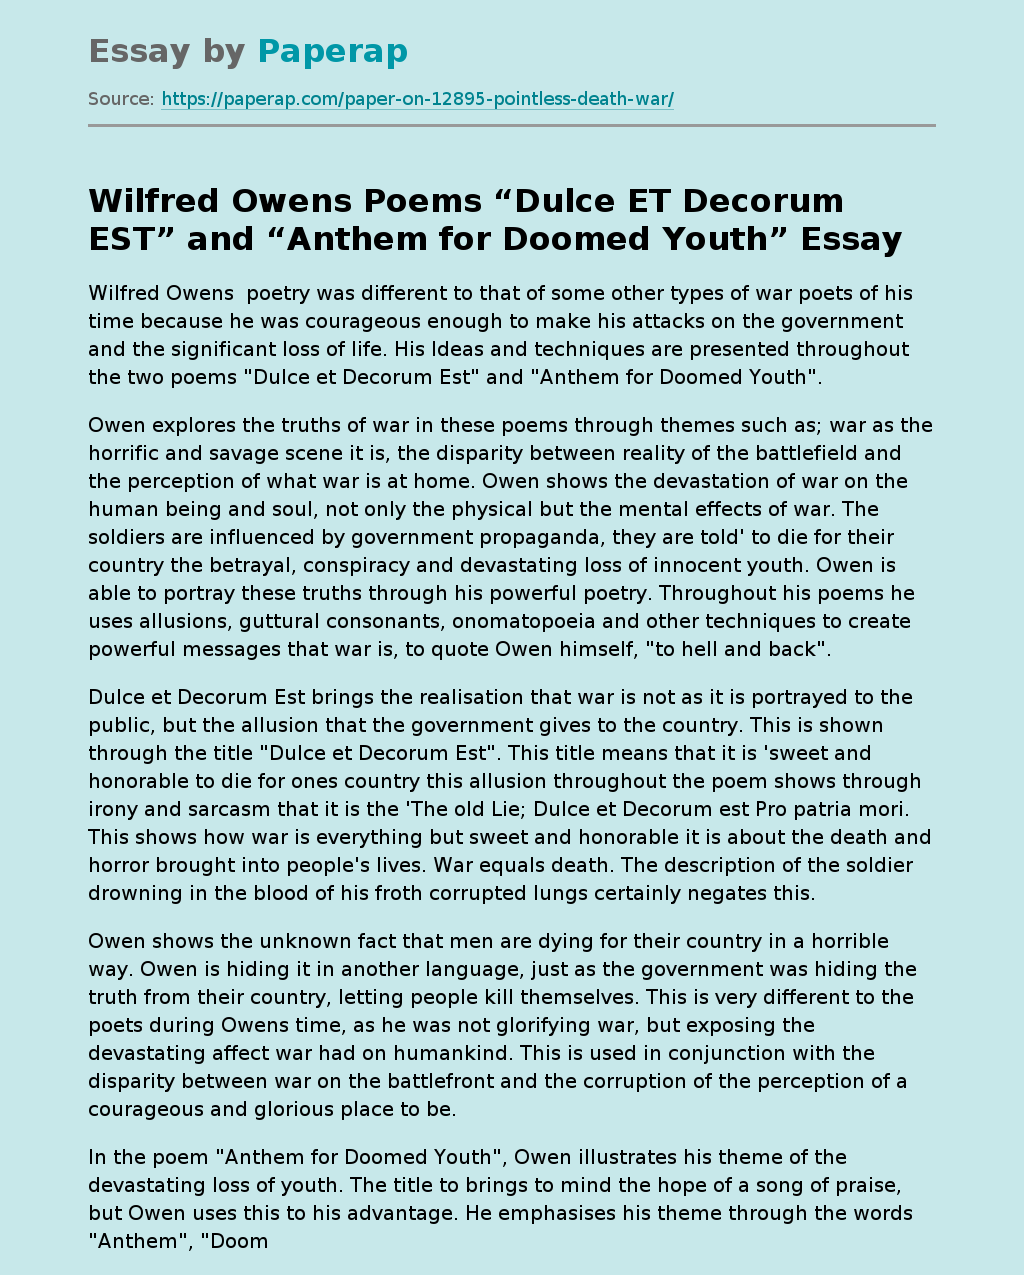 Wilfred Owens Poems “Dulce ET Decorum EST” and “Anthem for Doomed Youth”